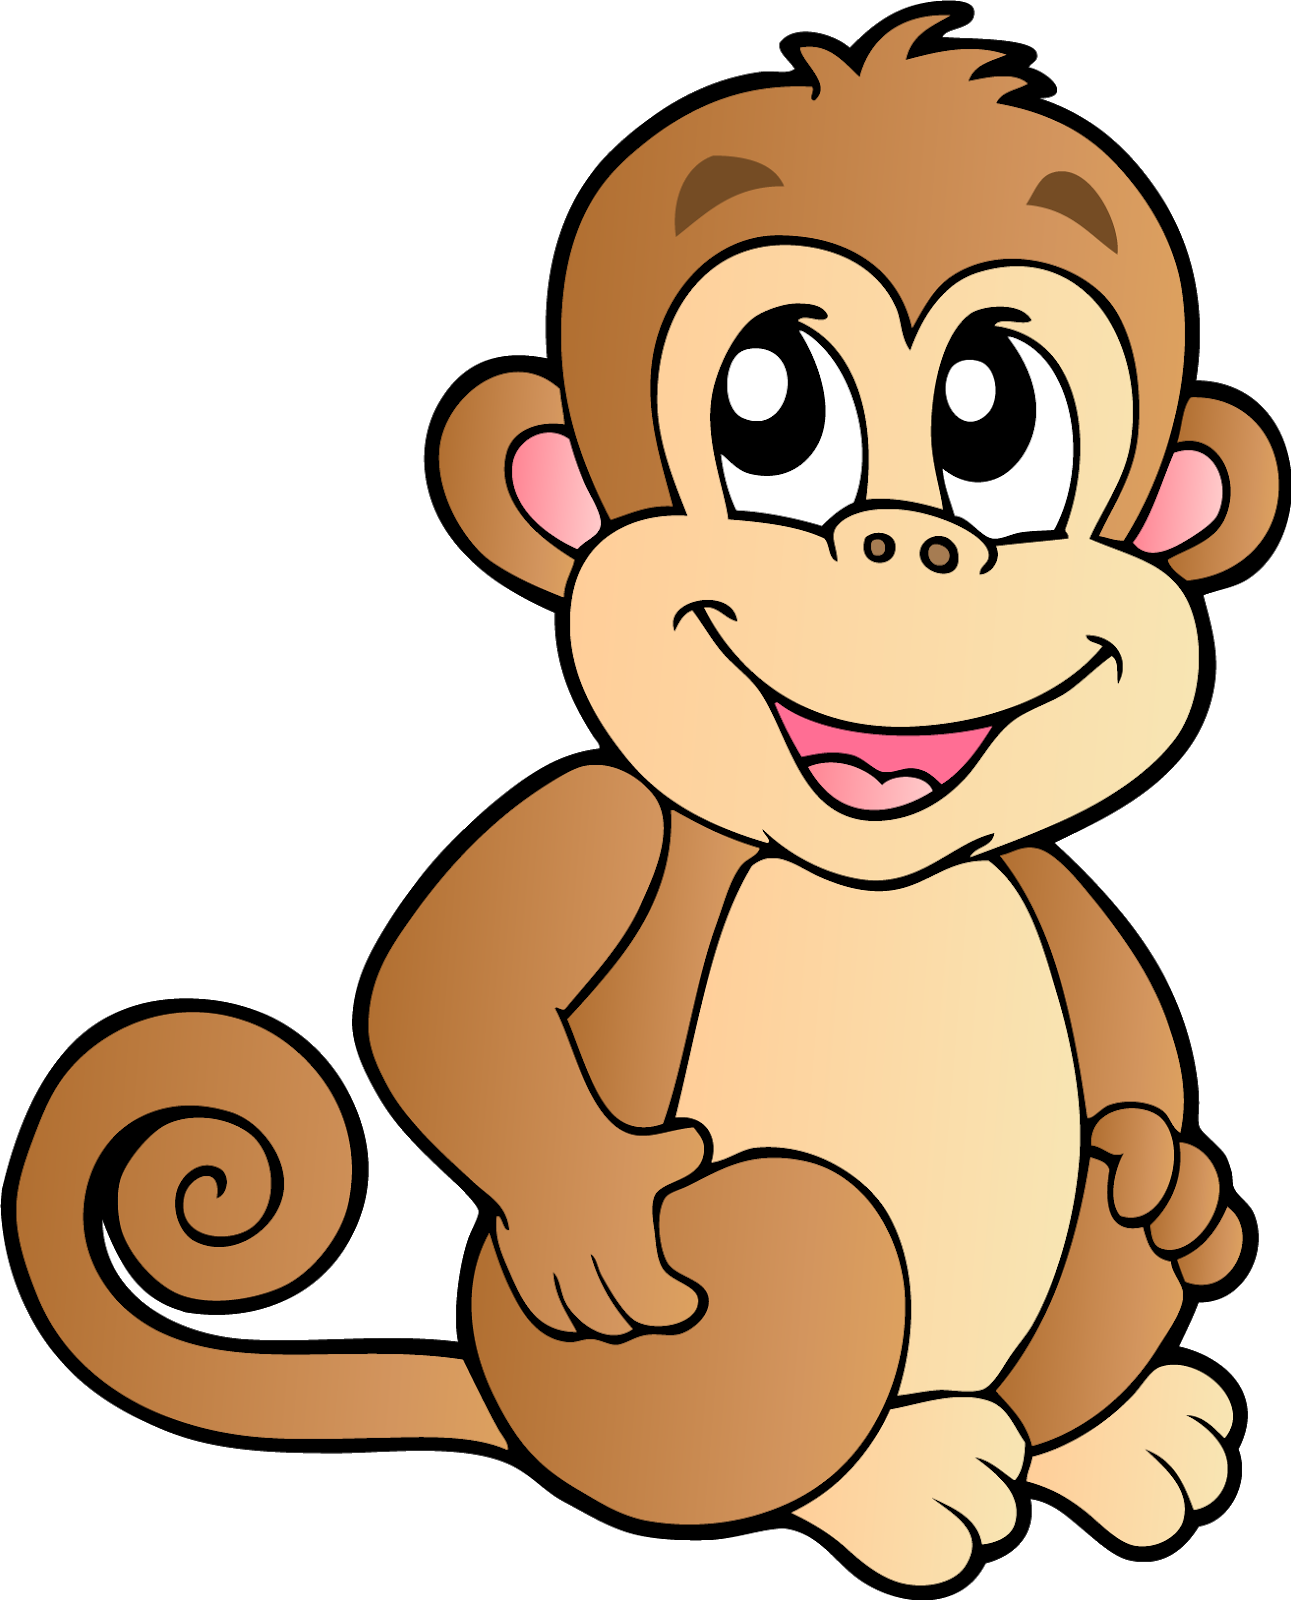 Monkey Cartoon Drawing Images : How To Draw Cartoons: Monkey | Bodendwasuct